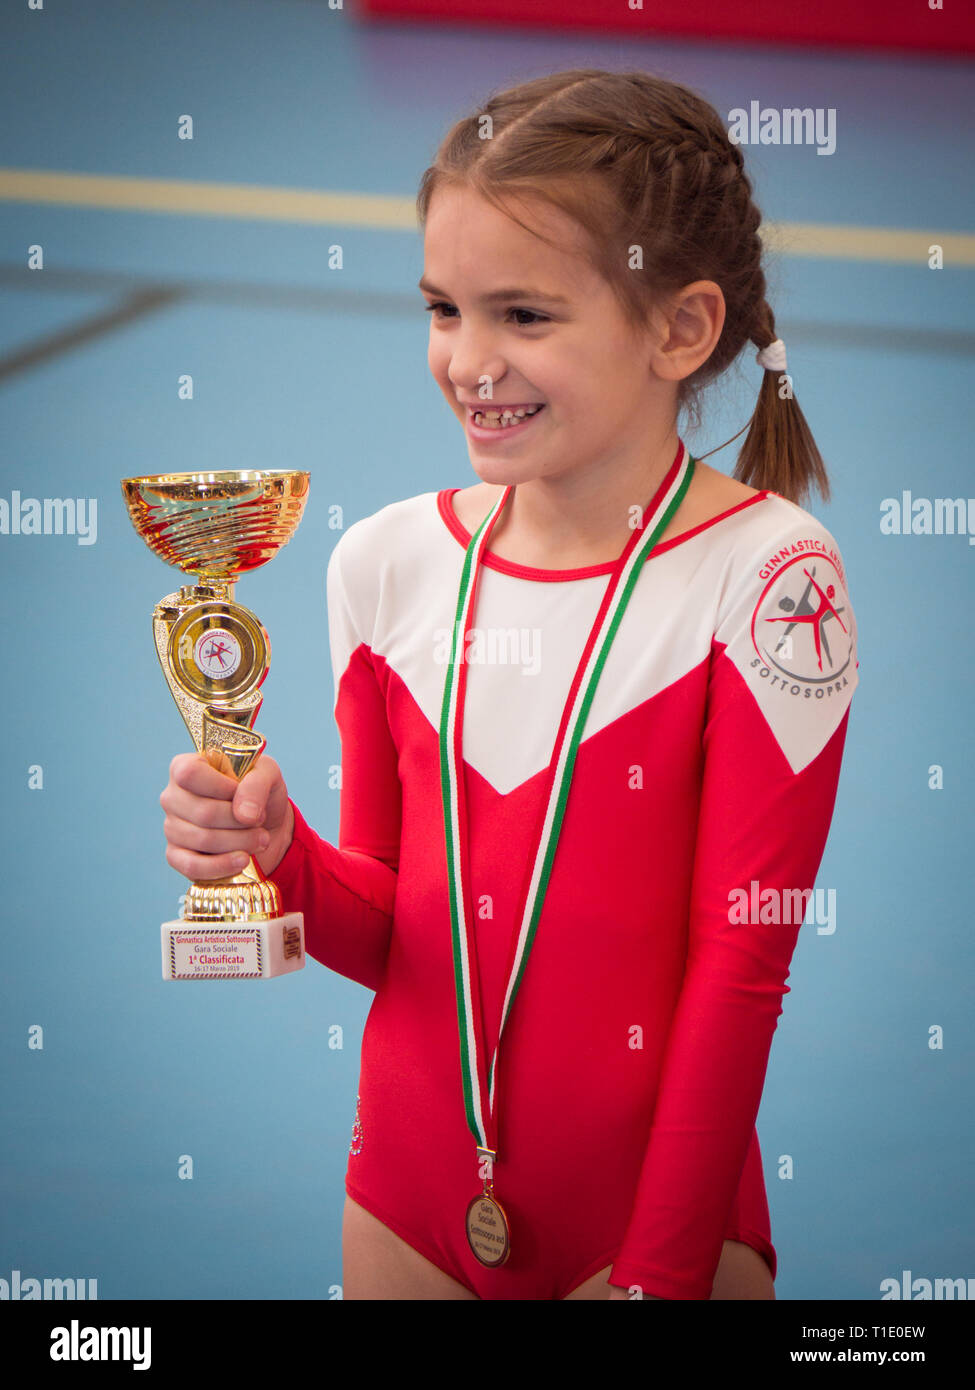 Verona, Italy - March 17, 2019: Award ceremony at the end of a junior women's artistic gymnastics competition. Stock Photo